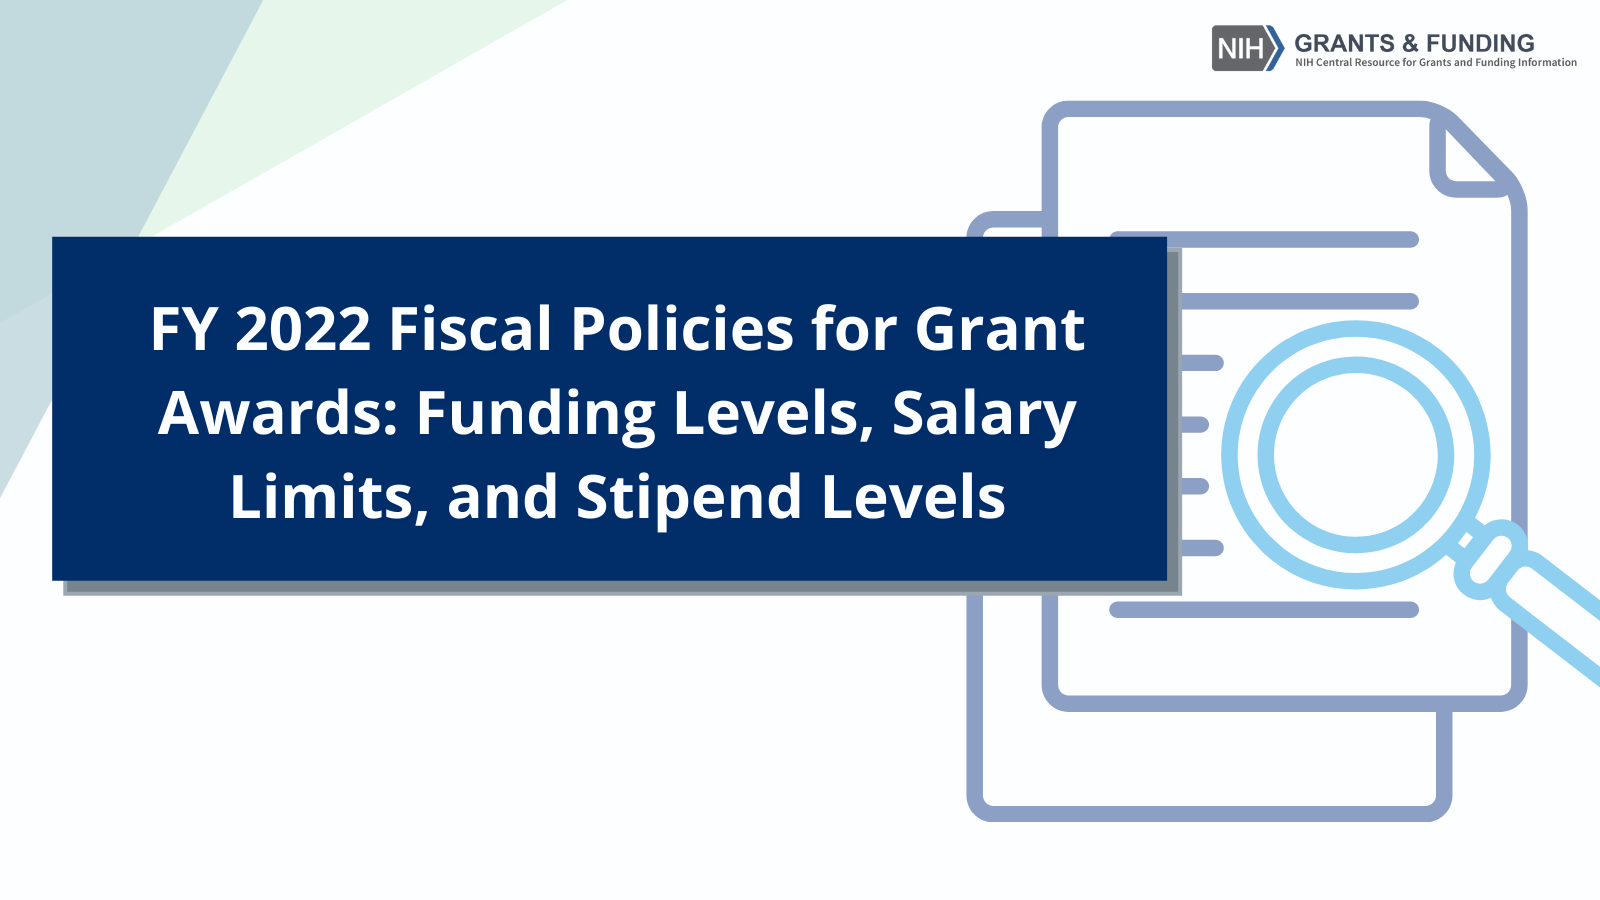 FY 2022 Fiscal Policies for Grant Awards Funding Levels, Salary Limits